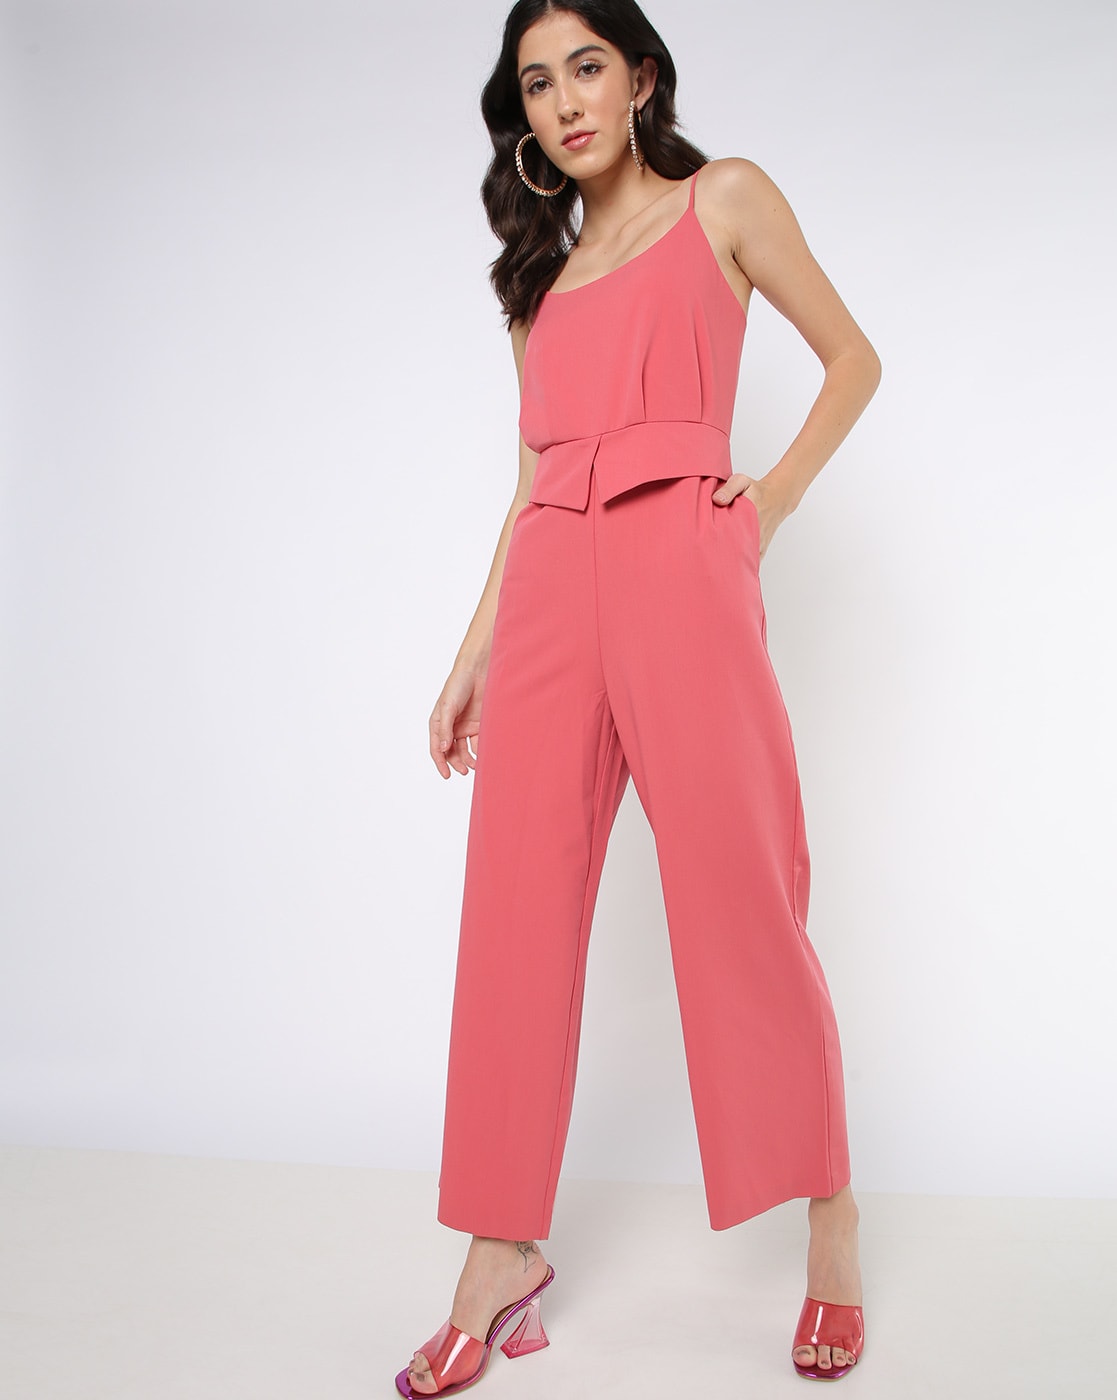 NA High Sleeve Jumpsuit Women Party Swallowtail Slim Spring Summer Ladies  Wide Leg Jumpsuits Color  Red Size  XXLarge code  Amazoncouk  Fashion